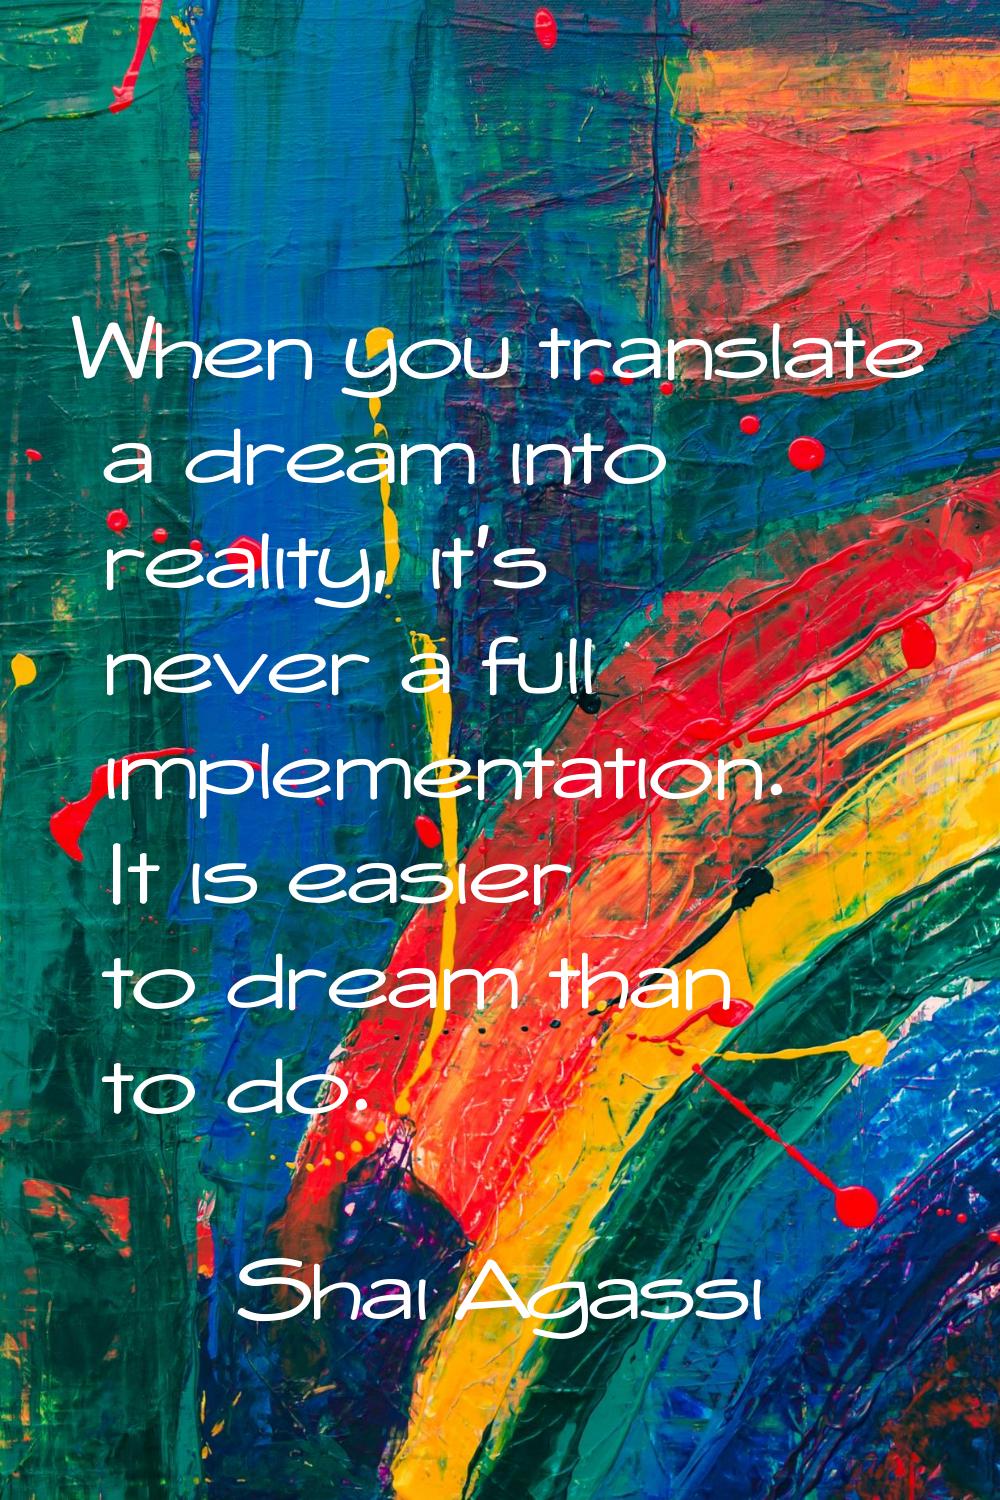 When you translate a dream into reality, it's never a full implementation. It is easier to dream th